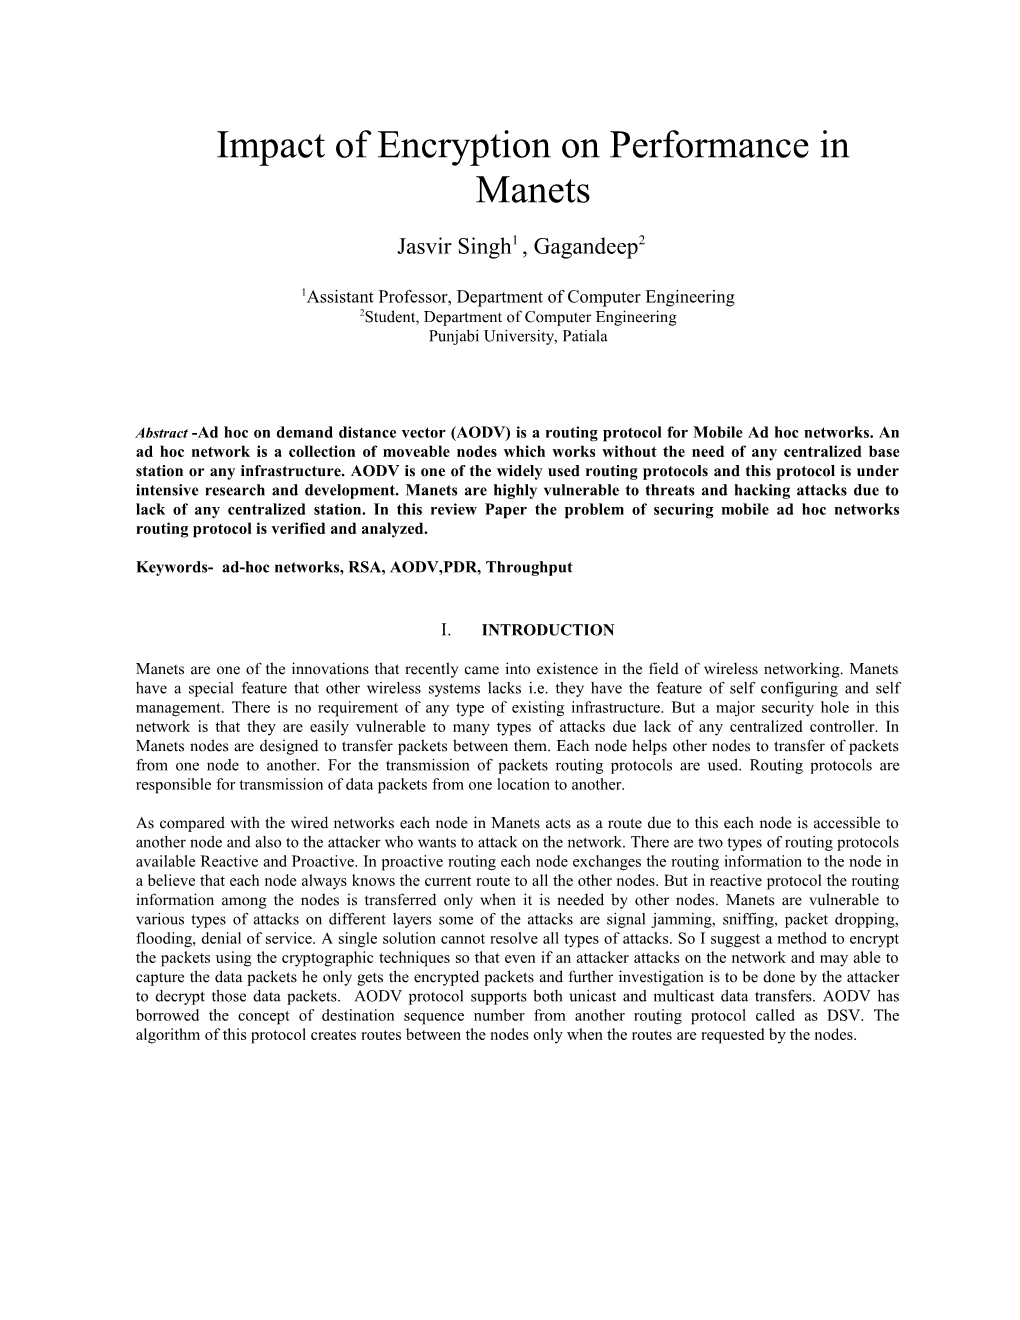 Impact of Encryption on Performance in Manets